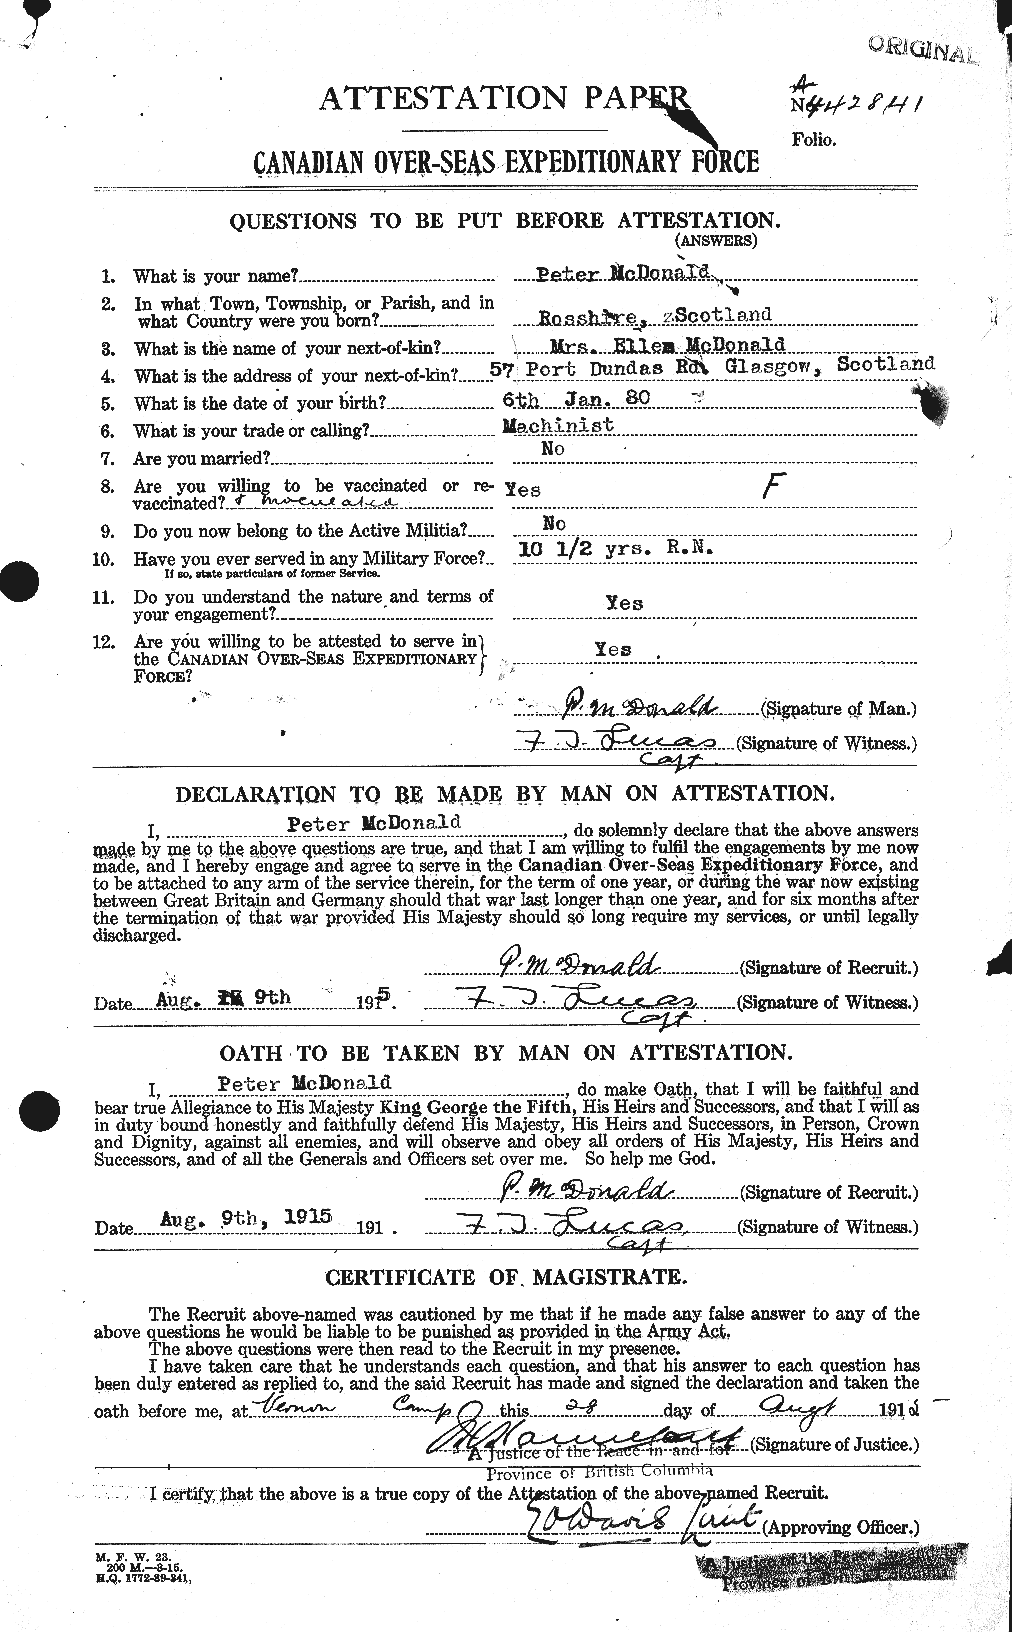 Personnel Records of the First World War - CEF 524755a